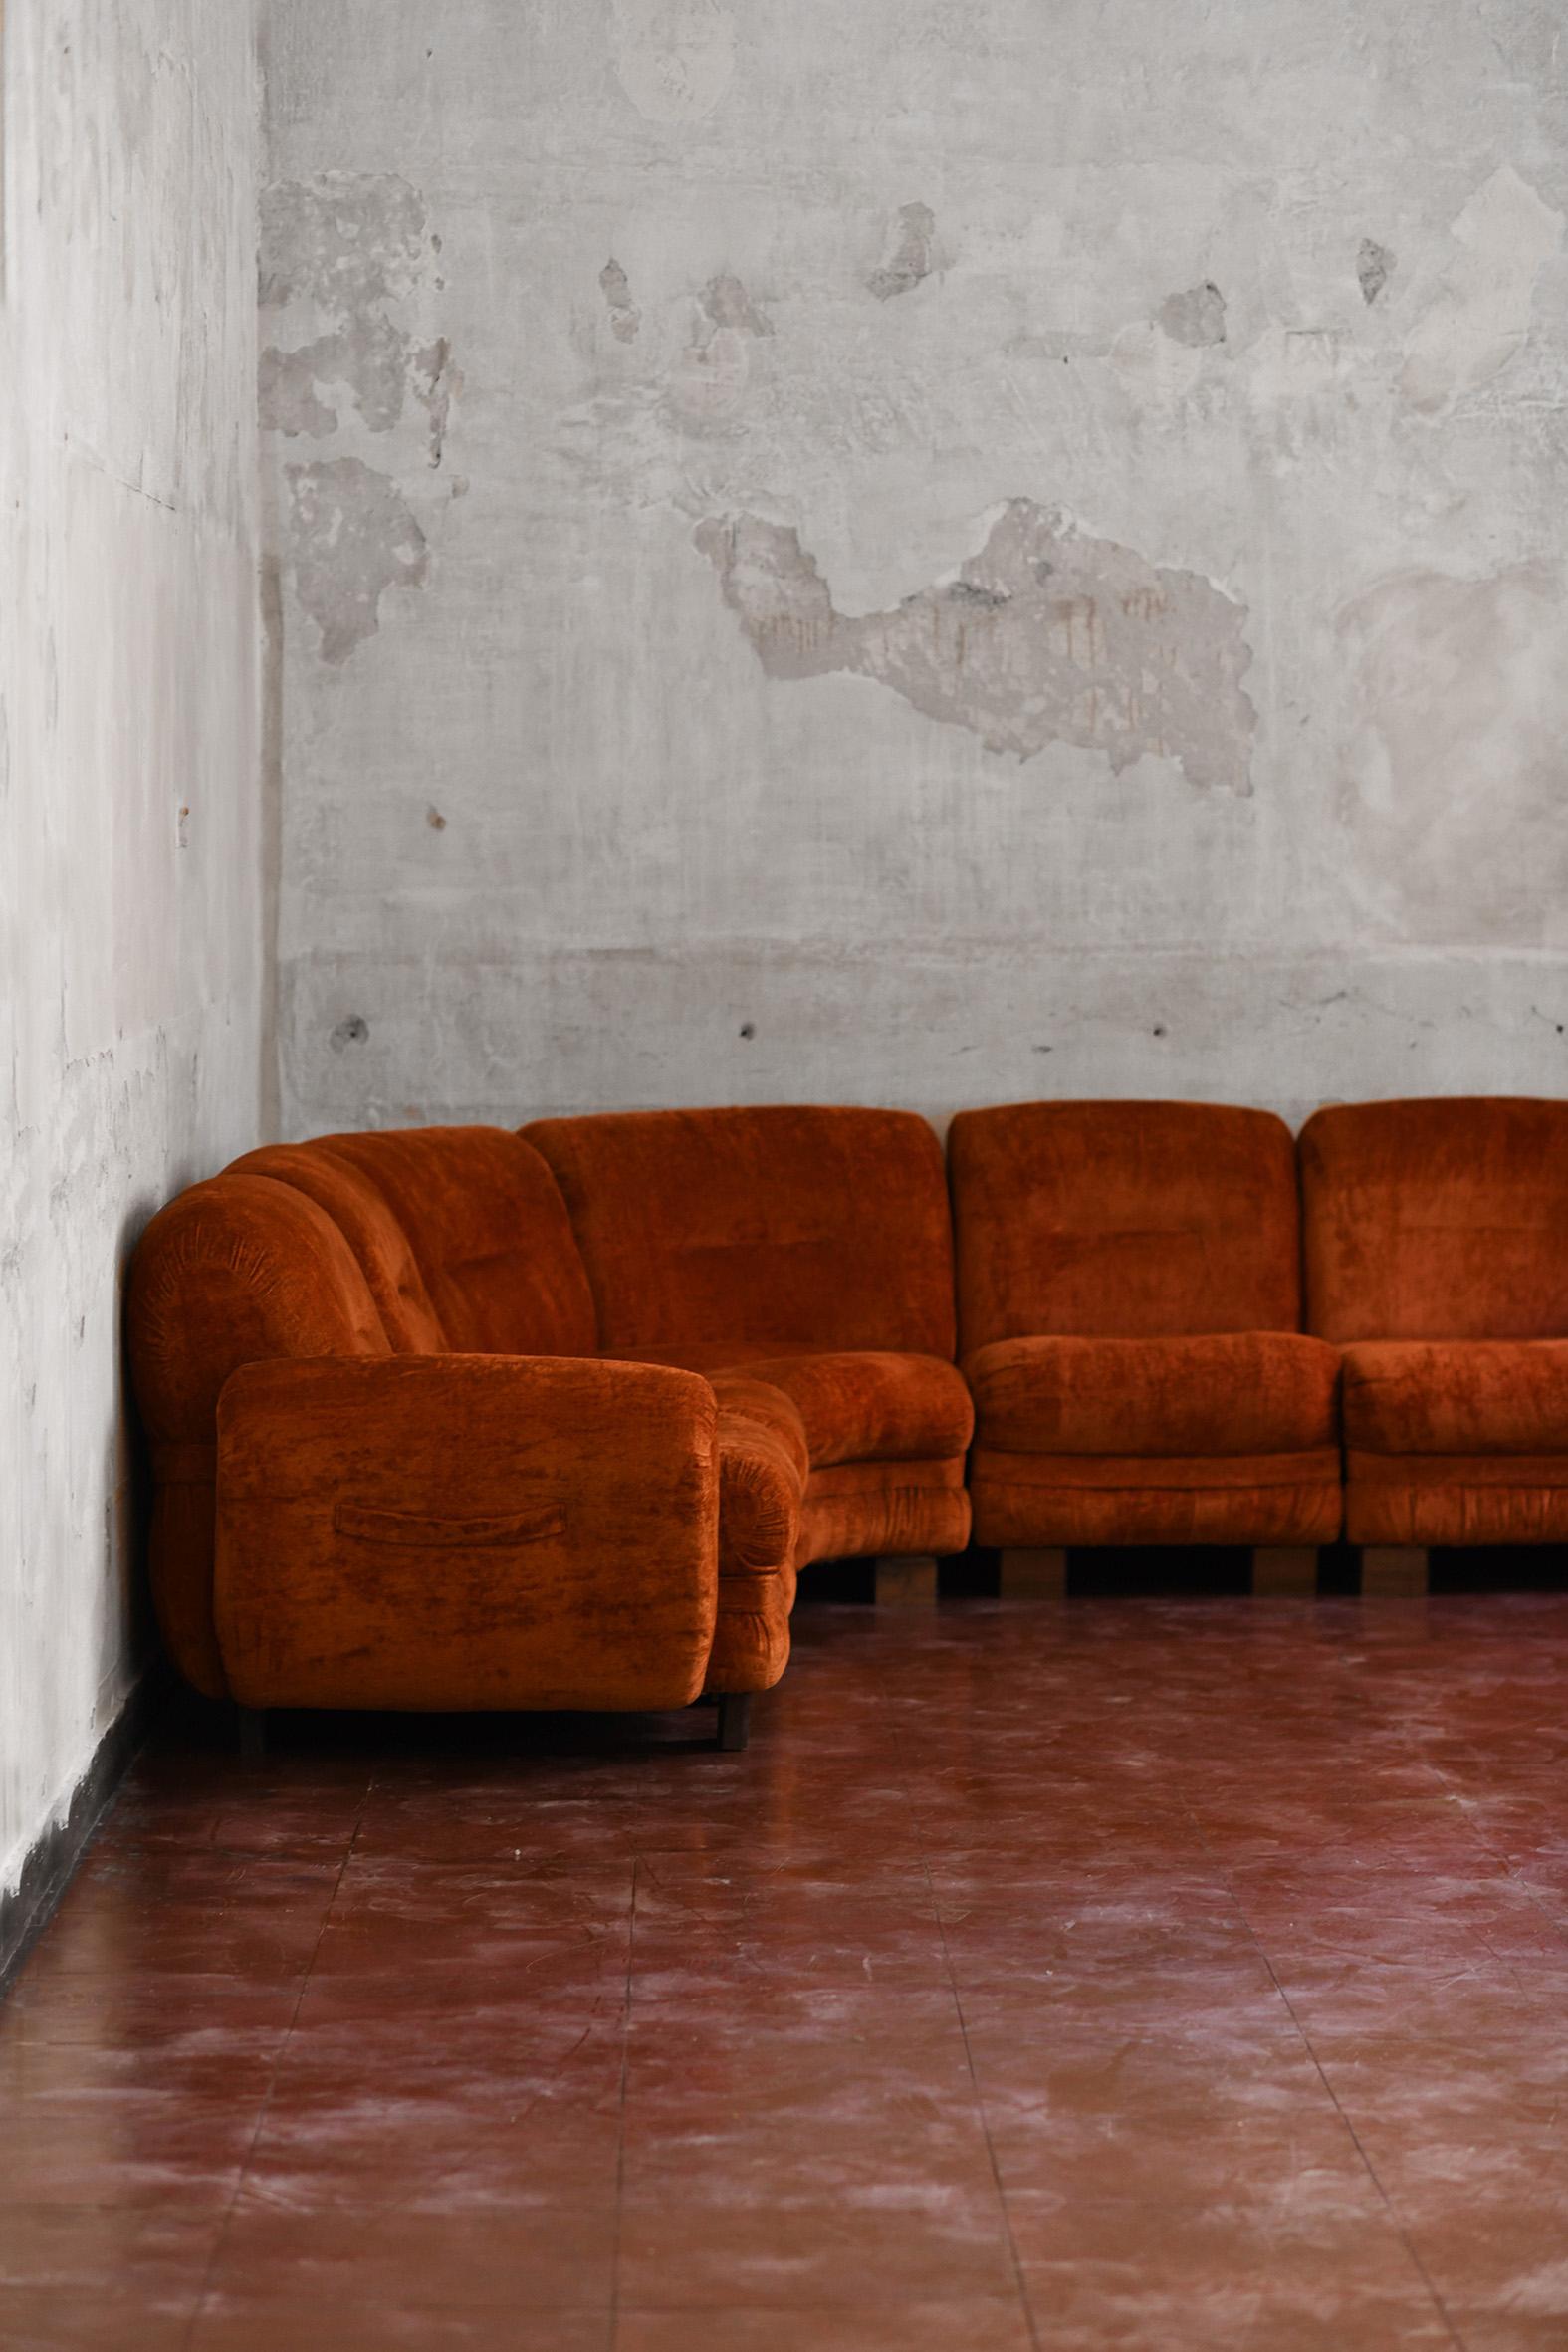 Large modular velvet sofa with wooden feet, Italy 1980.
Product details
Dimensions: 350 W x 80 H x 350 D cm